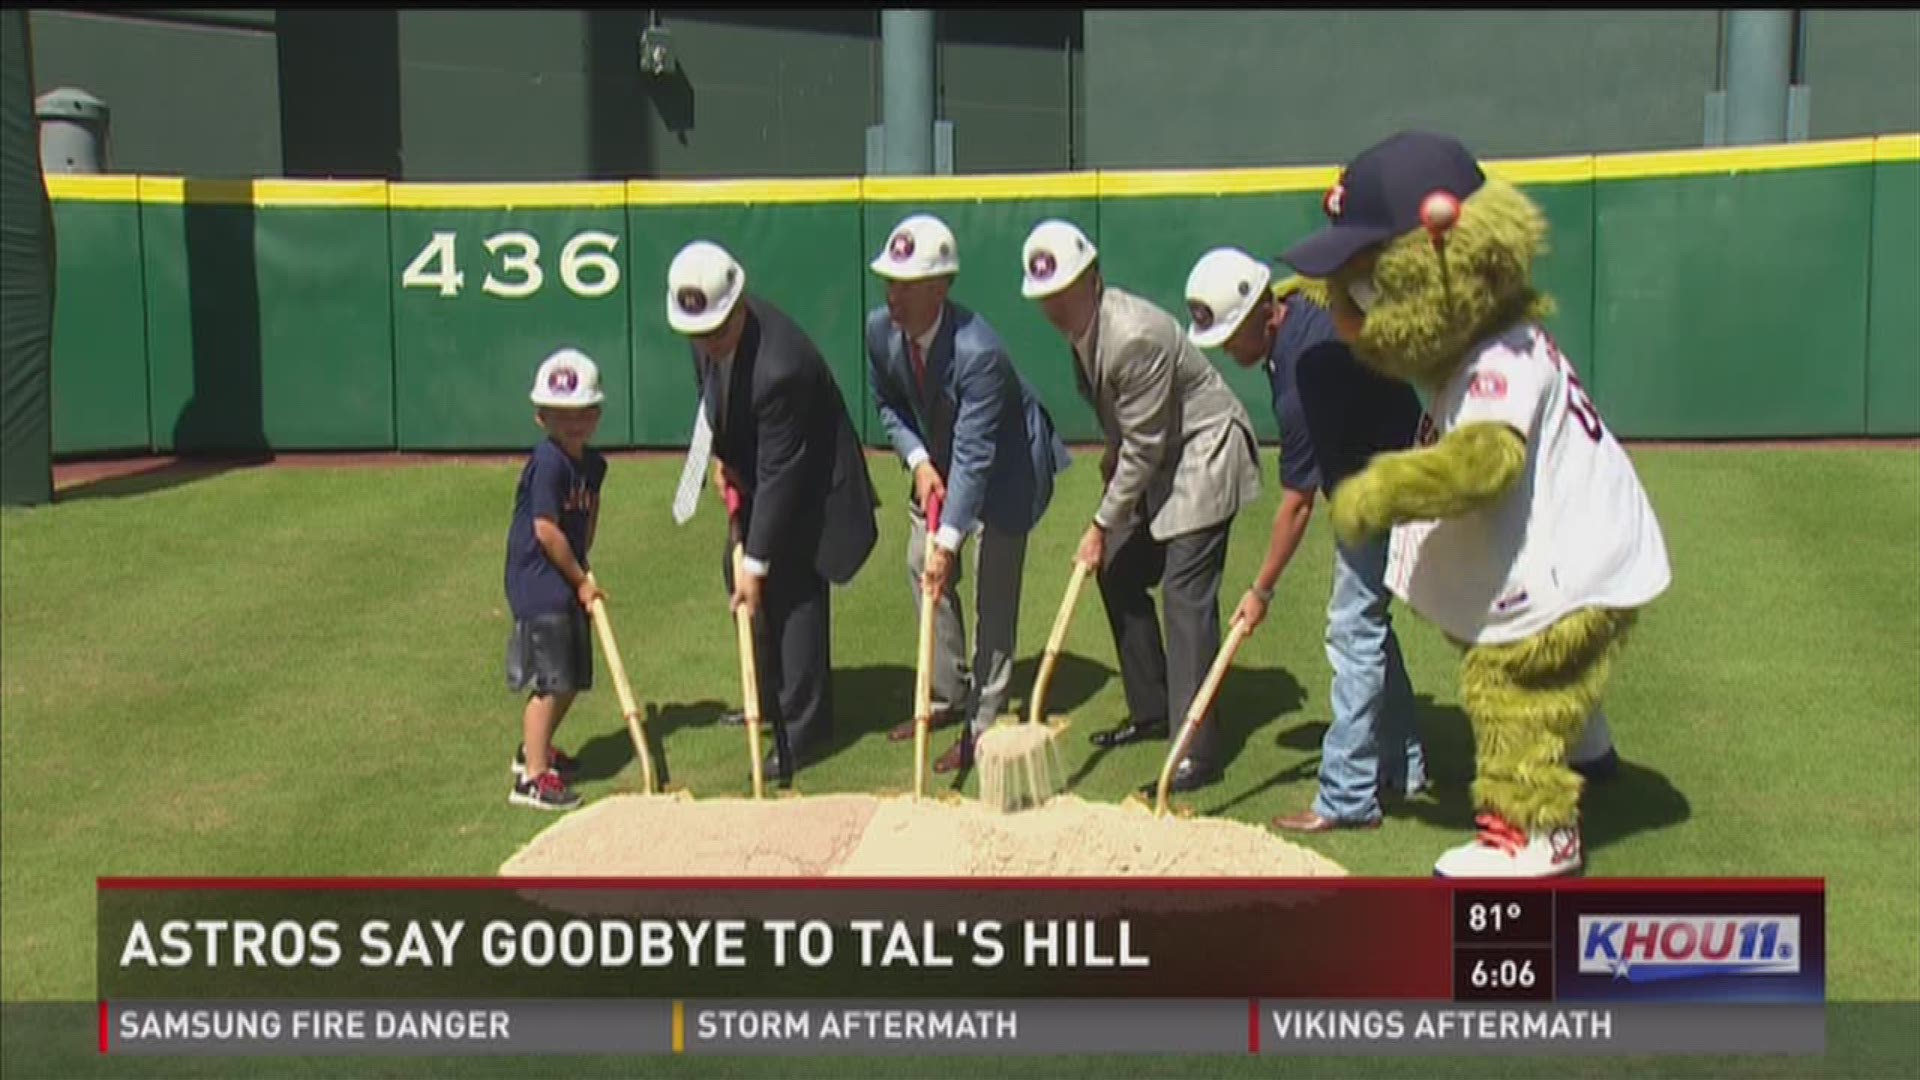 Astros break ground on Tal's Hill removal